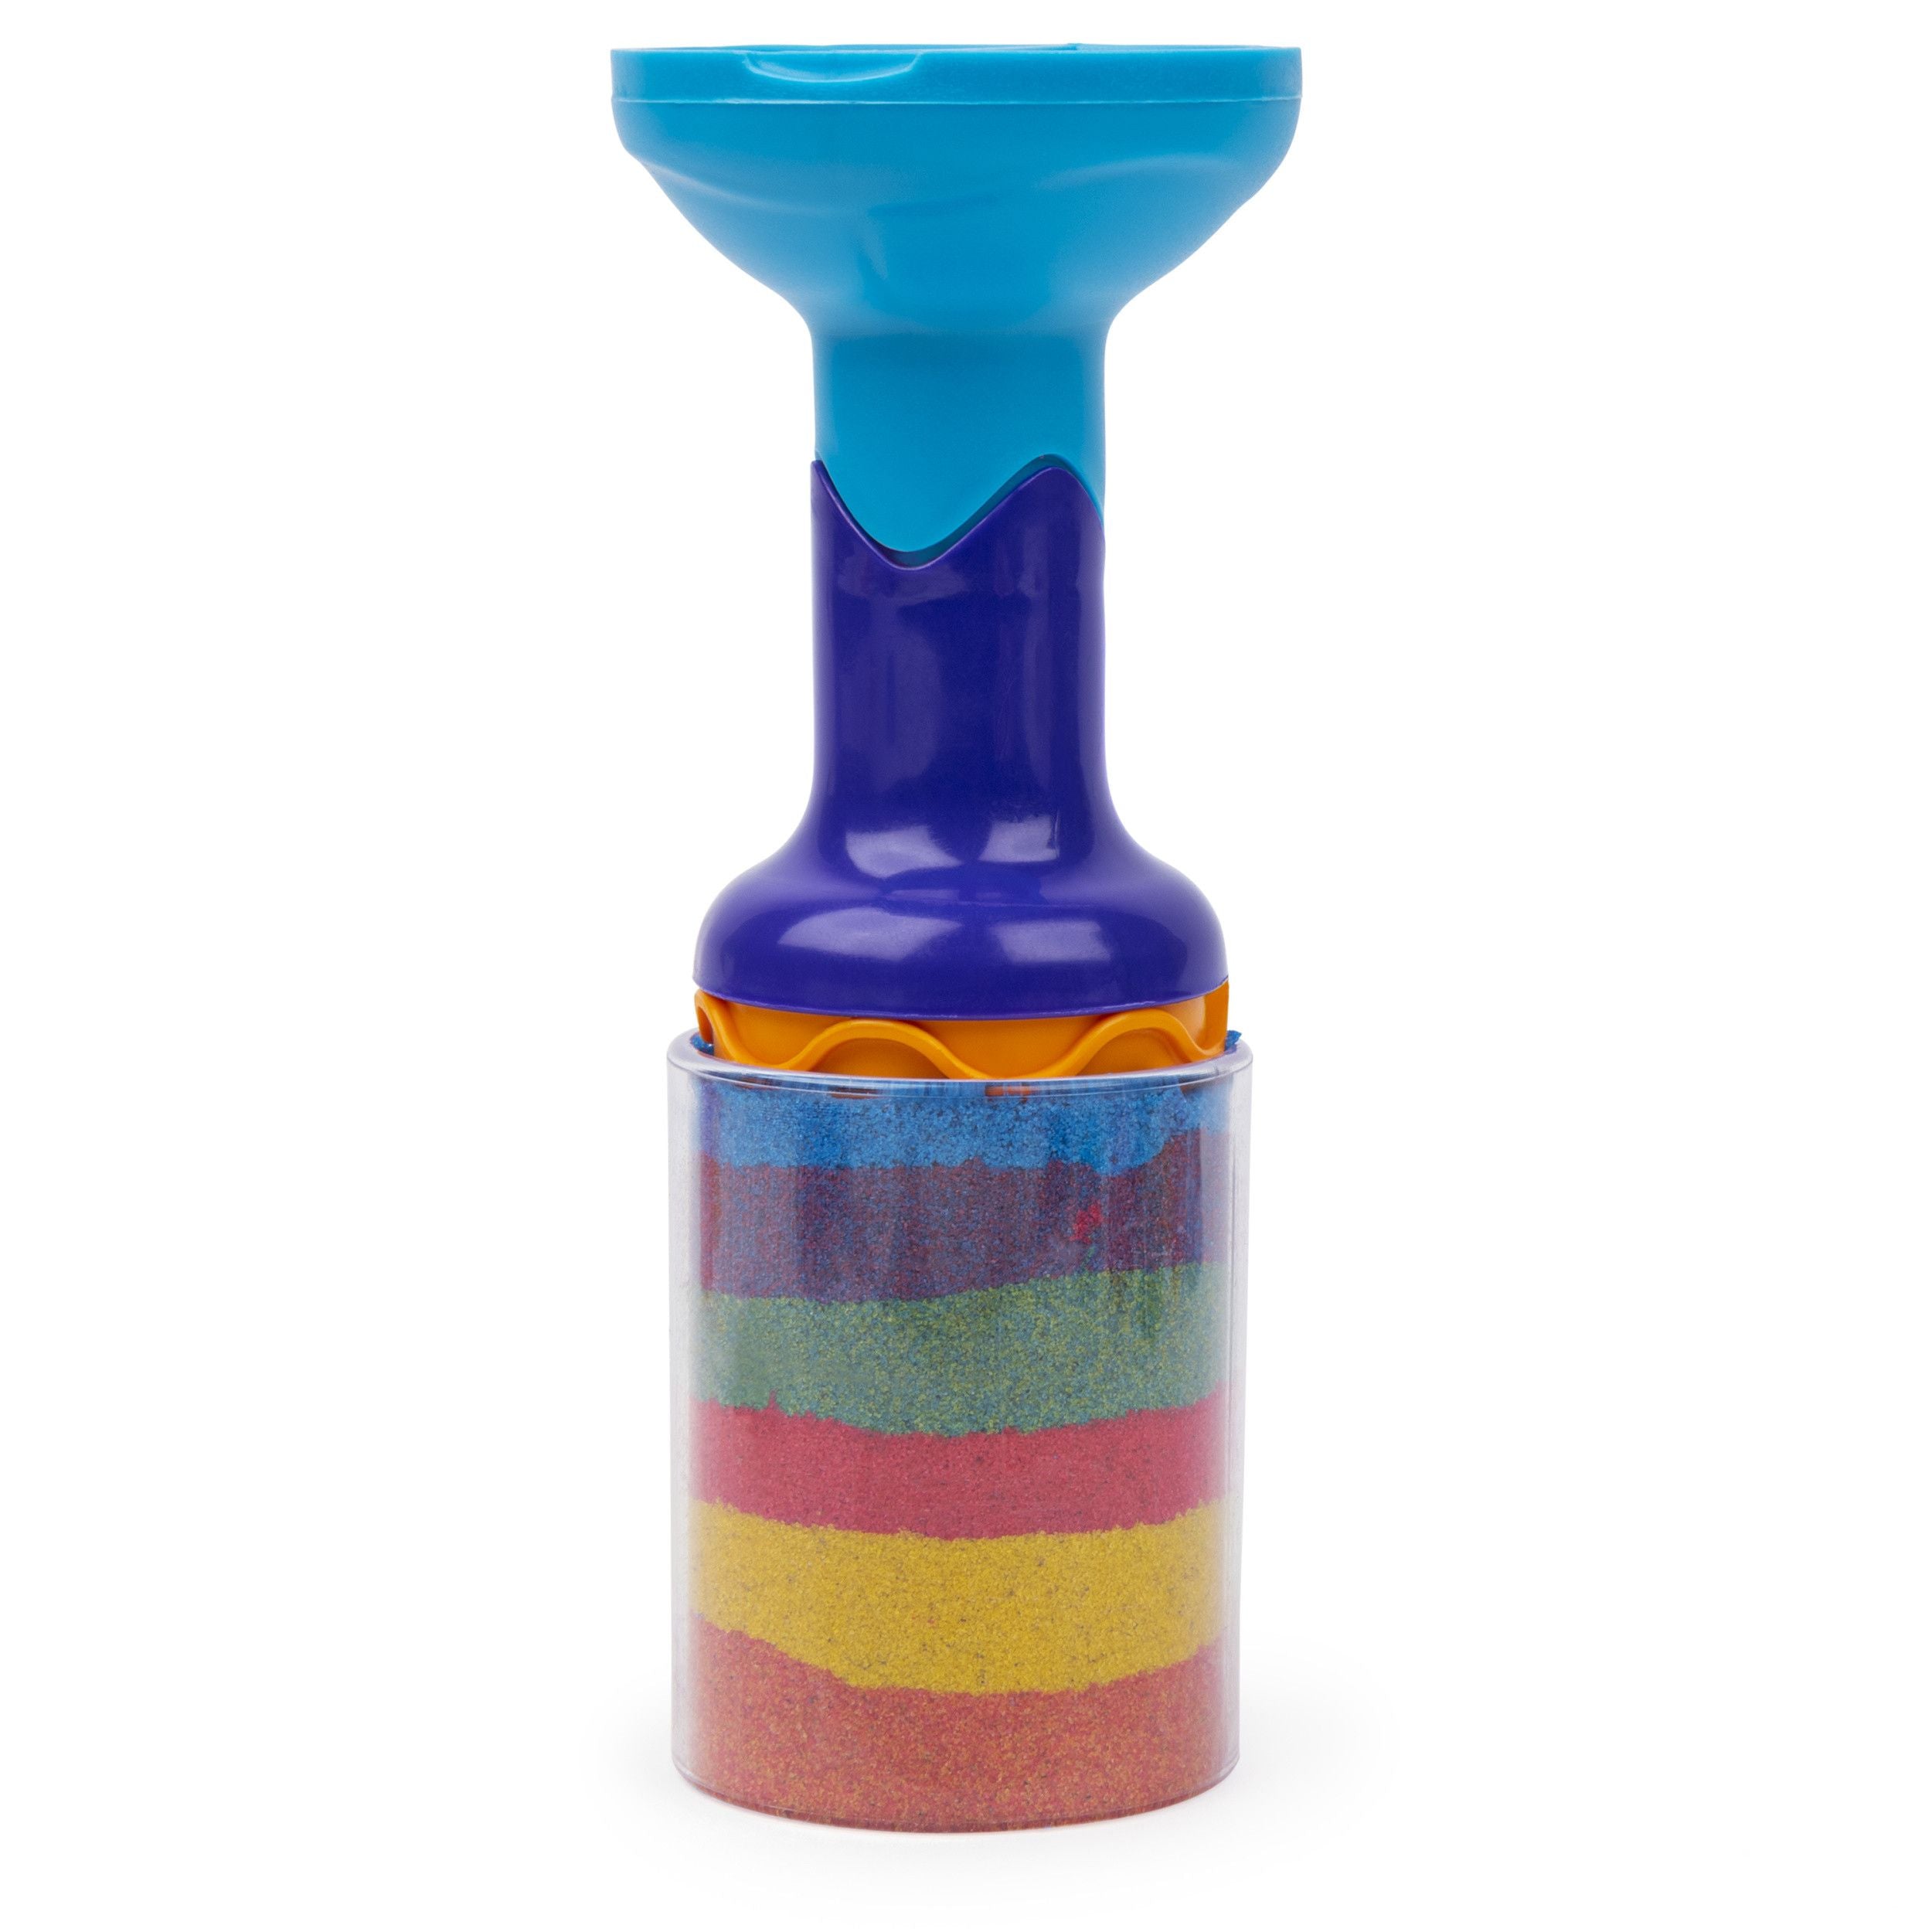 Spin master - learn the colours of rainbow with kinetic sand rainbow mix set 